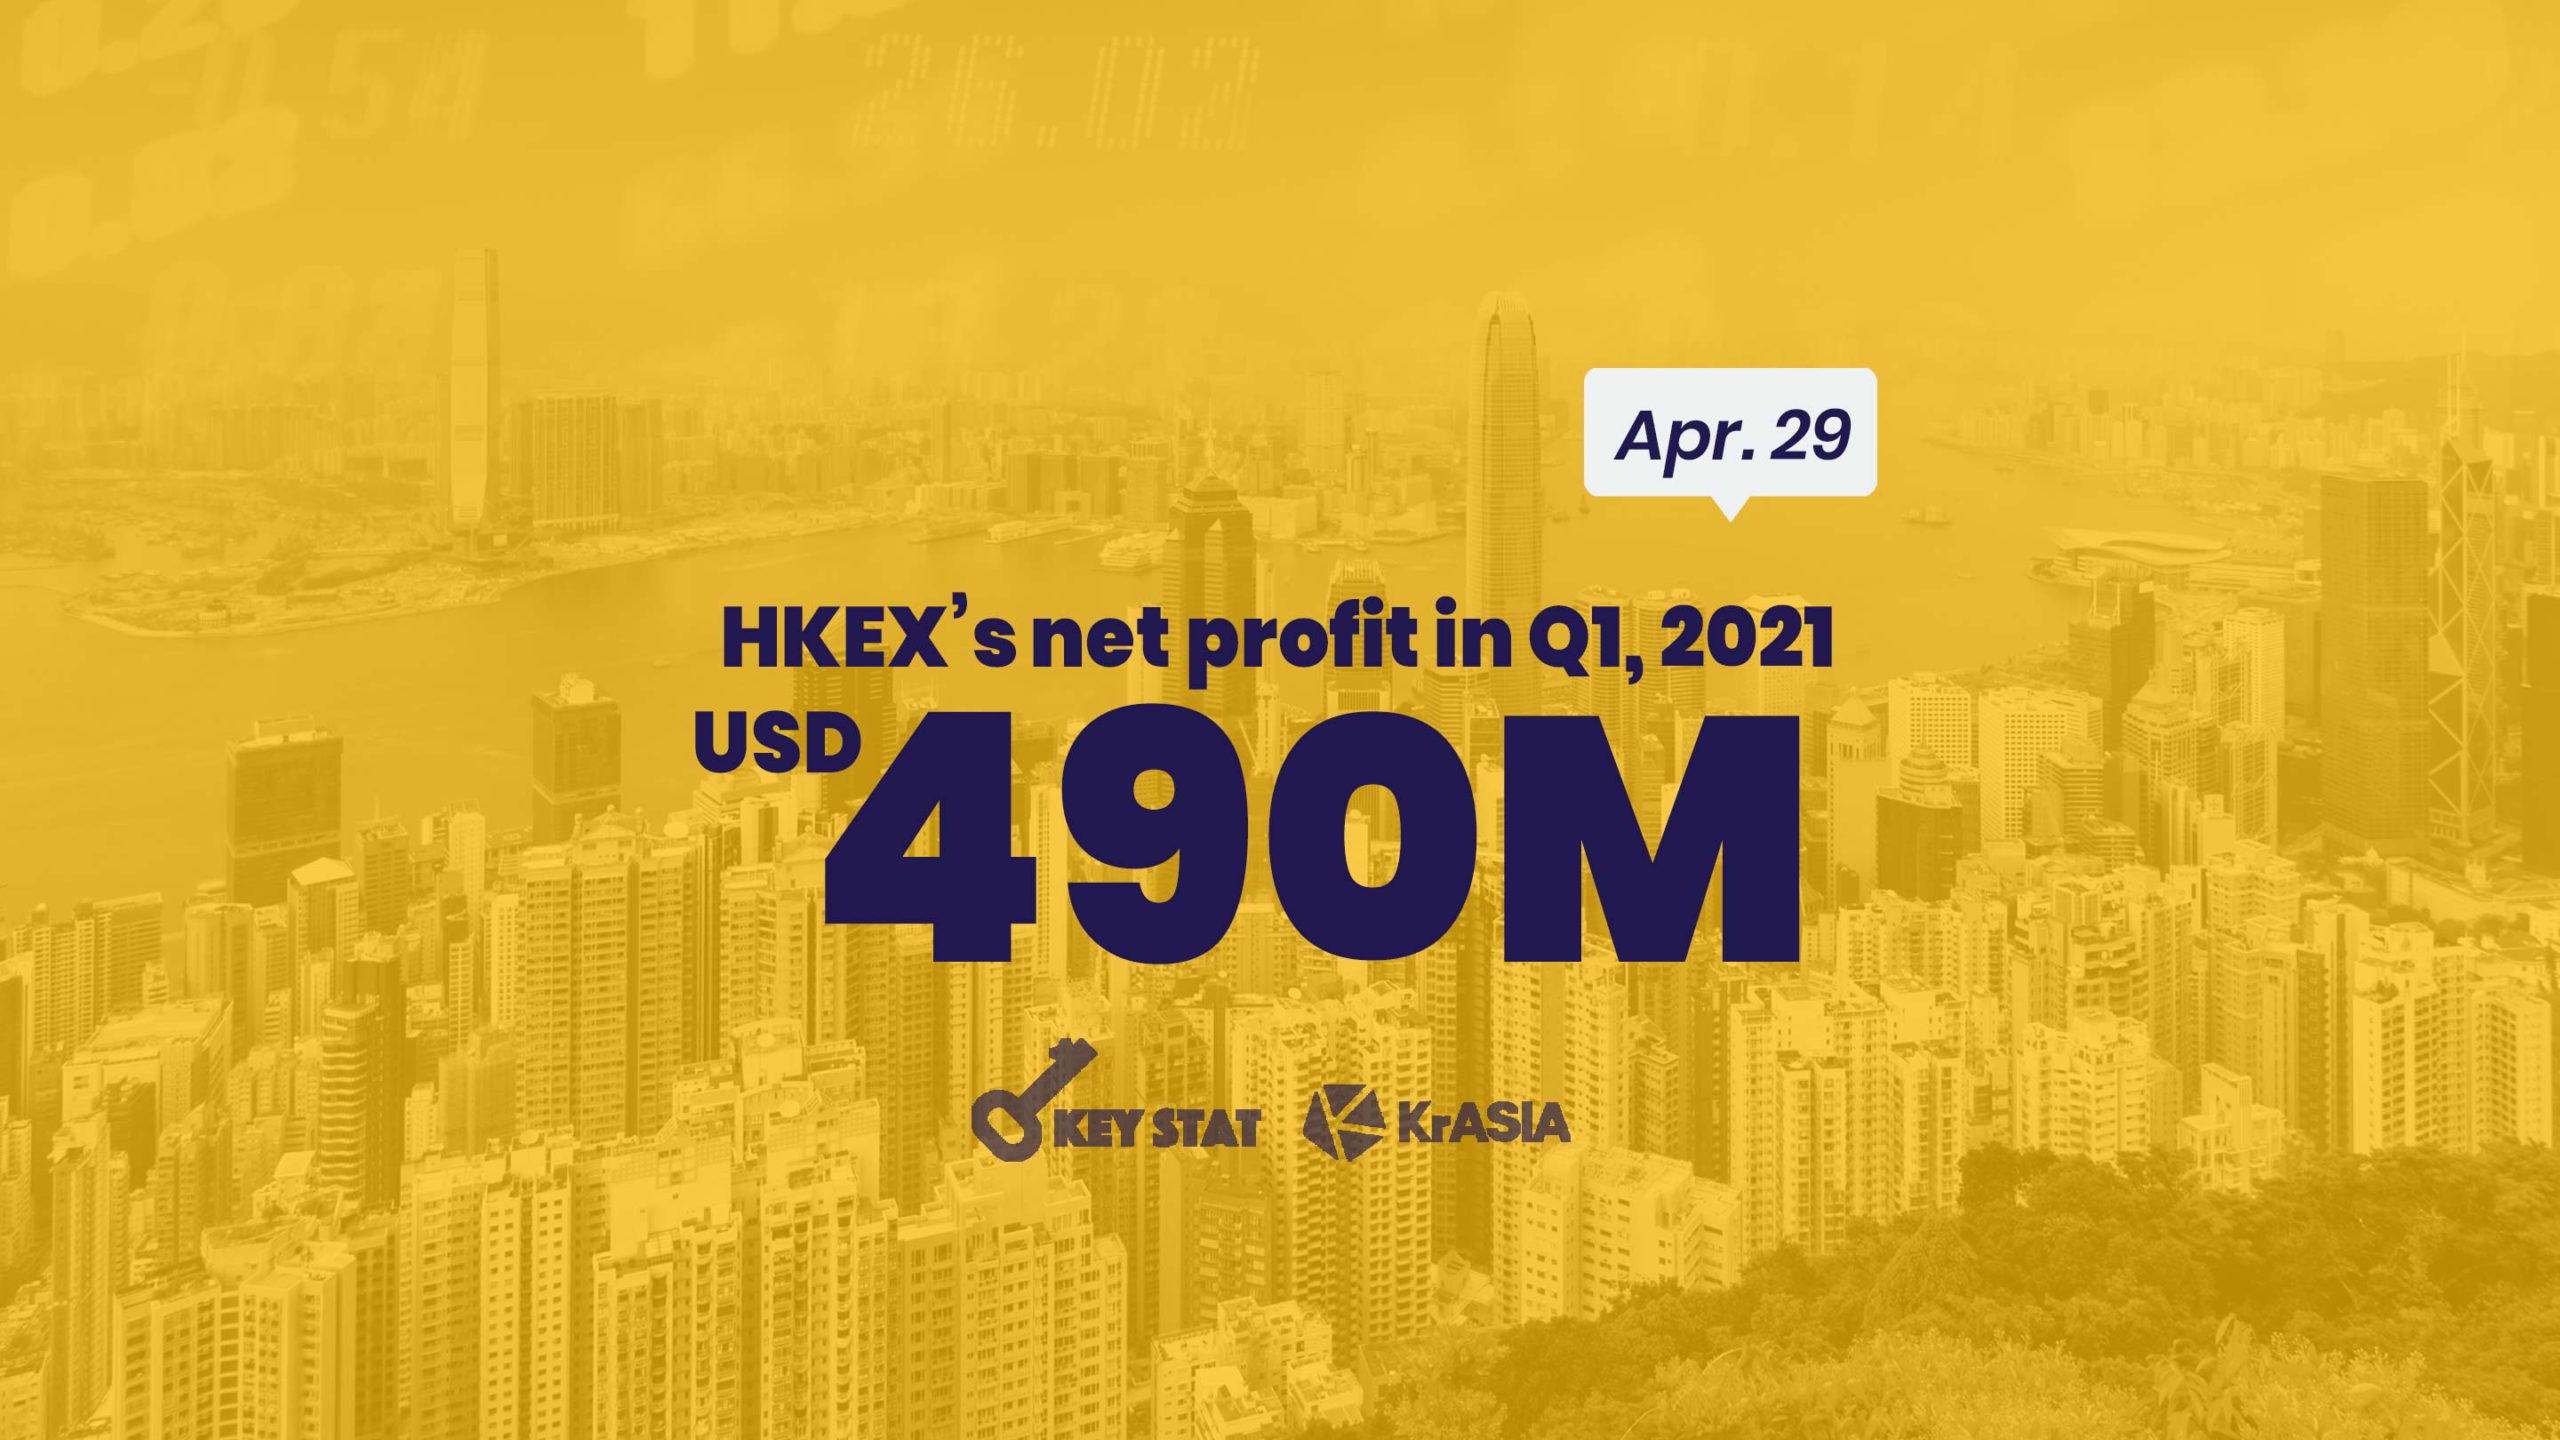 key-stat-hkex-posts-best-ever-q1-results-on-the-back-of-strong-tech-ipo-pipeline-krasia